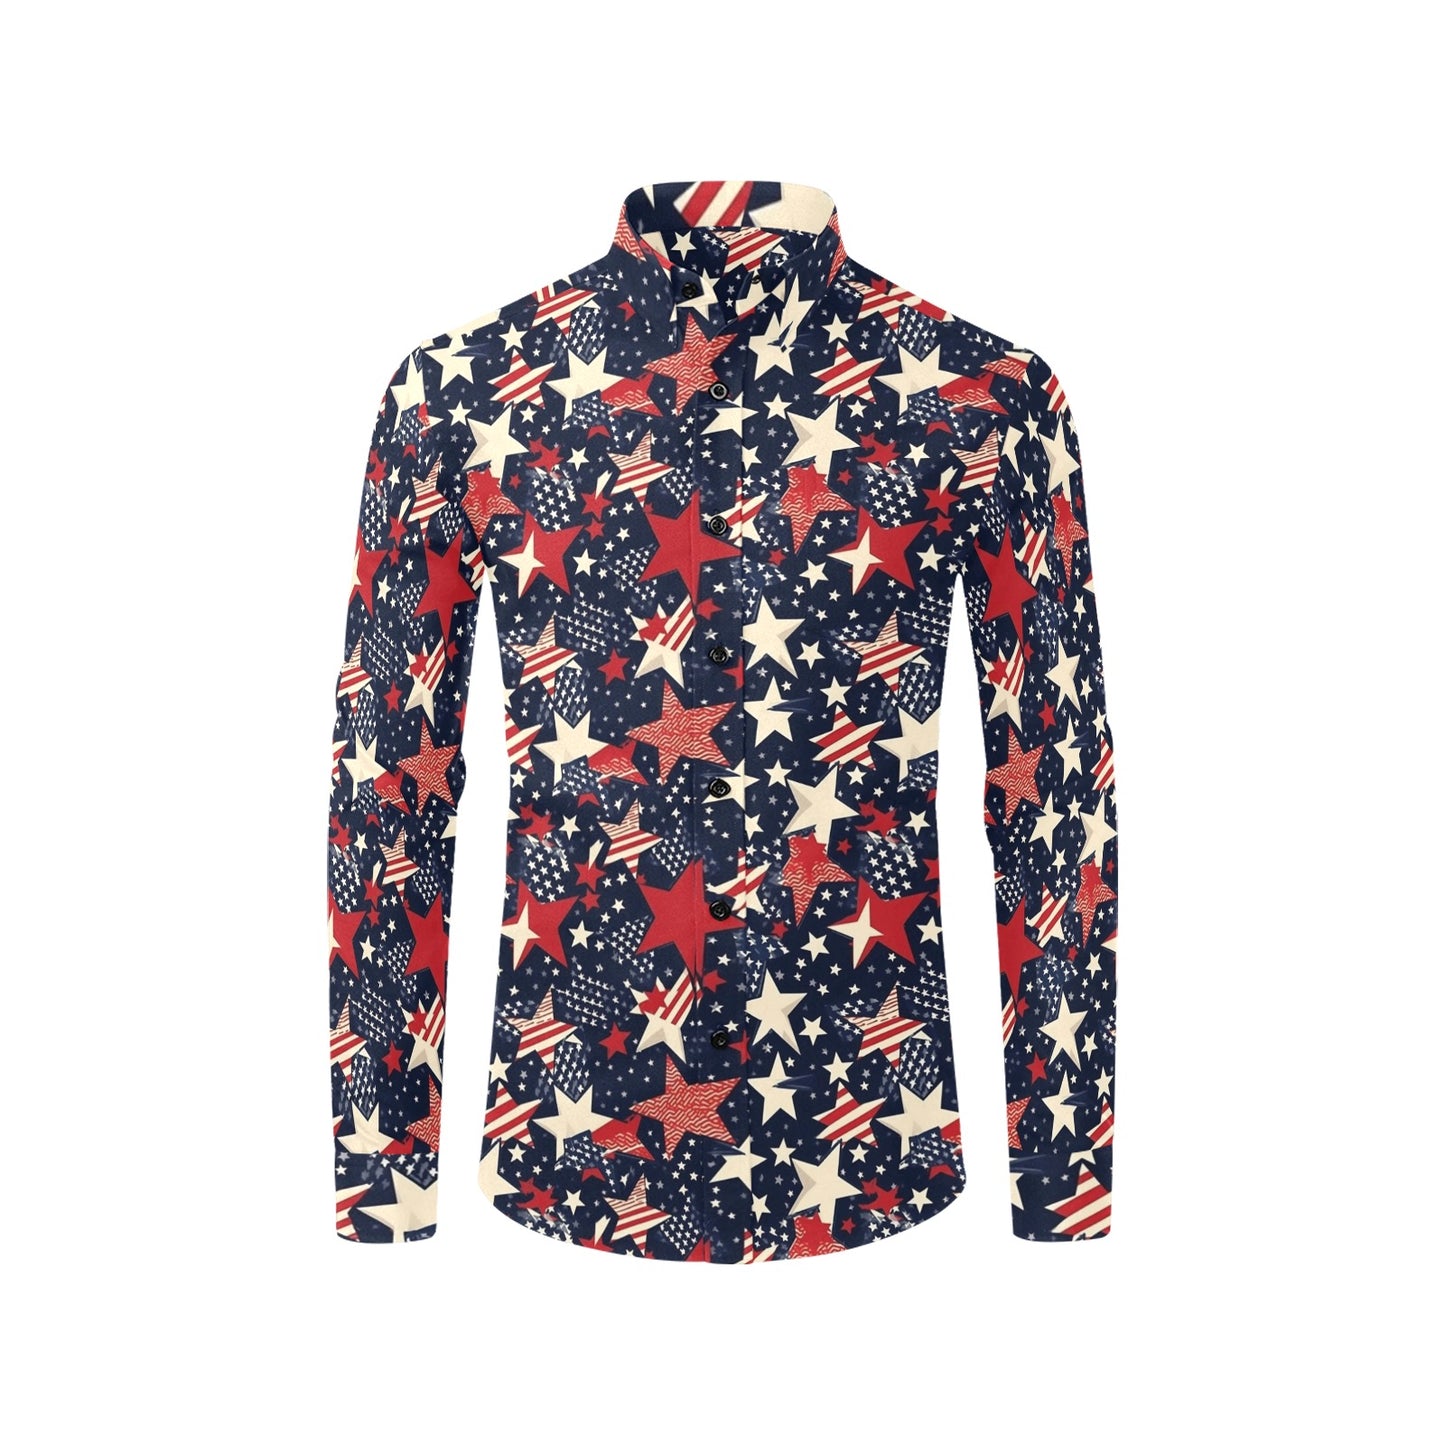 American Stars Long Sleeve Men Button Up Shirt, Patriotic USA Flag Red White Blue Print Buttoned Collar Casual Dress Shirt with Chest Pocket Starcove Fashion